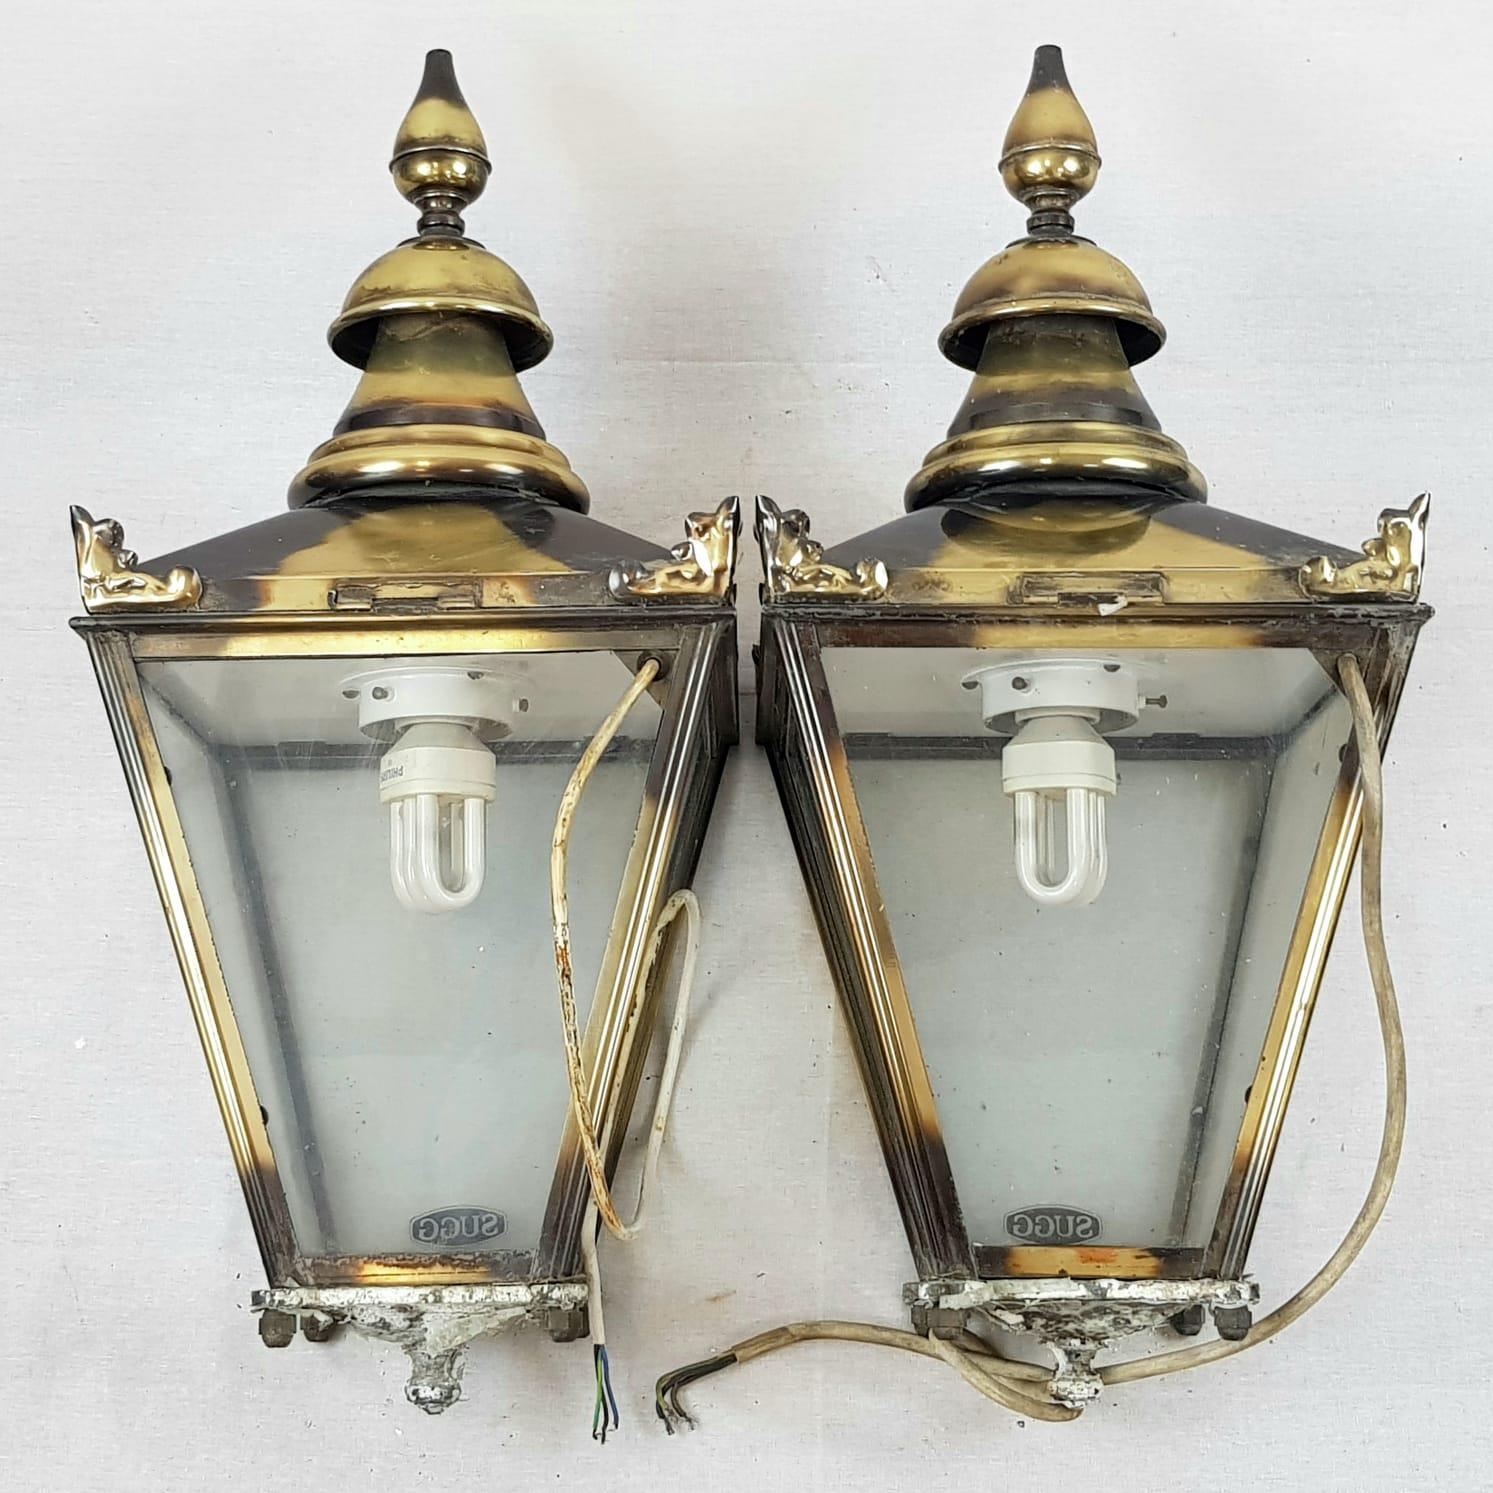 A Pair of Reproduction Victorian Top-Fix Brass Wall Lanterns. As Found. 31 x 70cm - Image 2 of 6